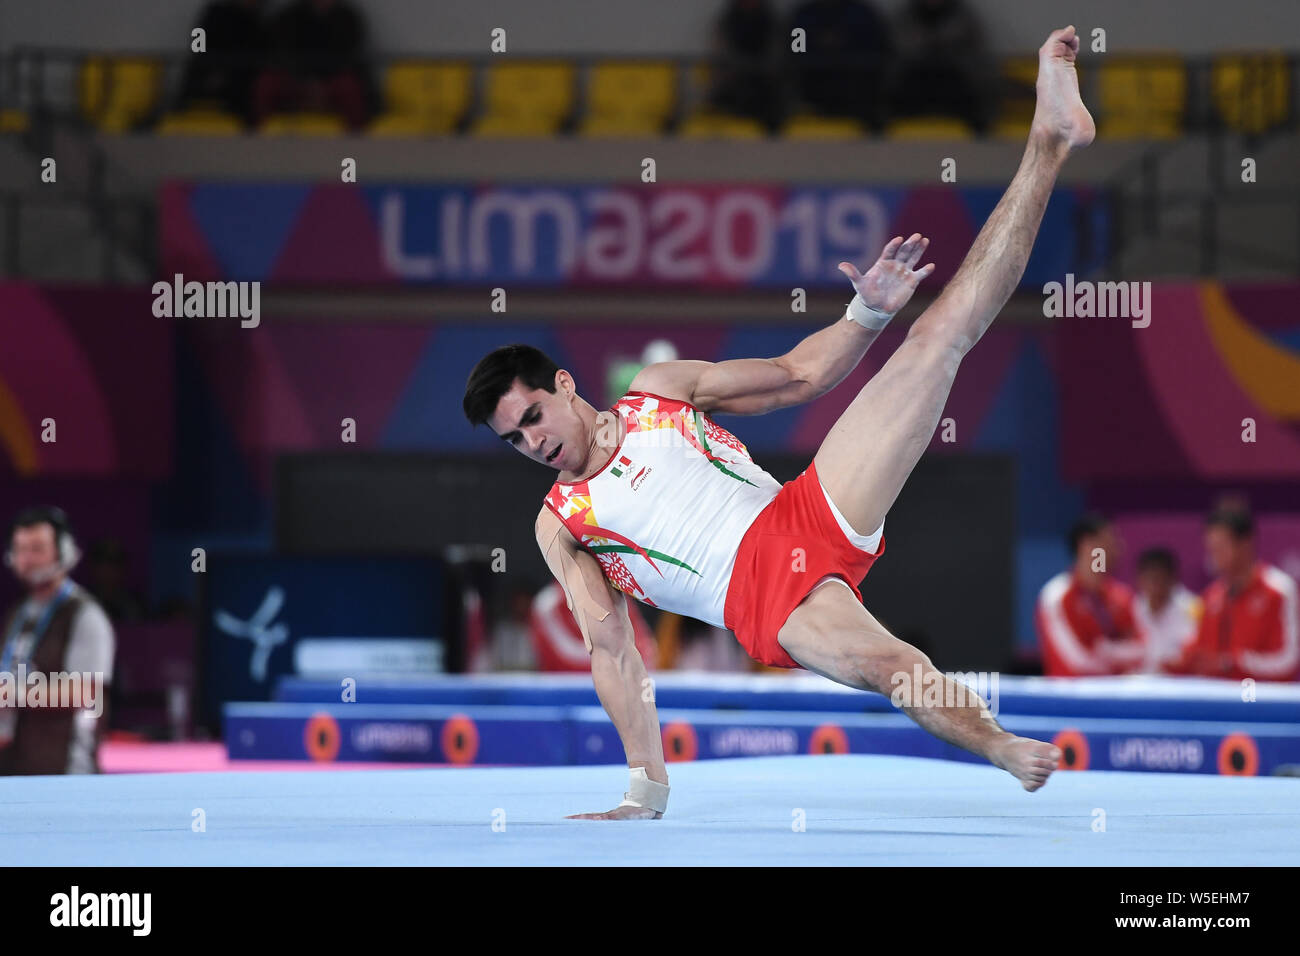 Lima Peru 28th July 2019 Daniel Corral From Mexico Competes On The Floor Exercise During The